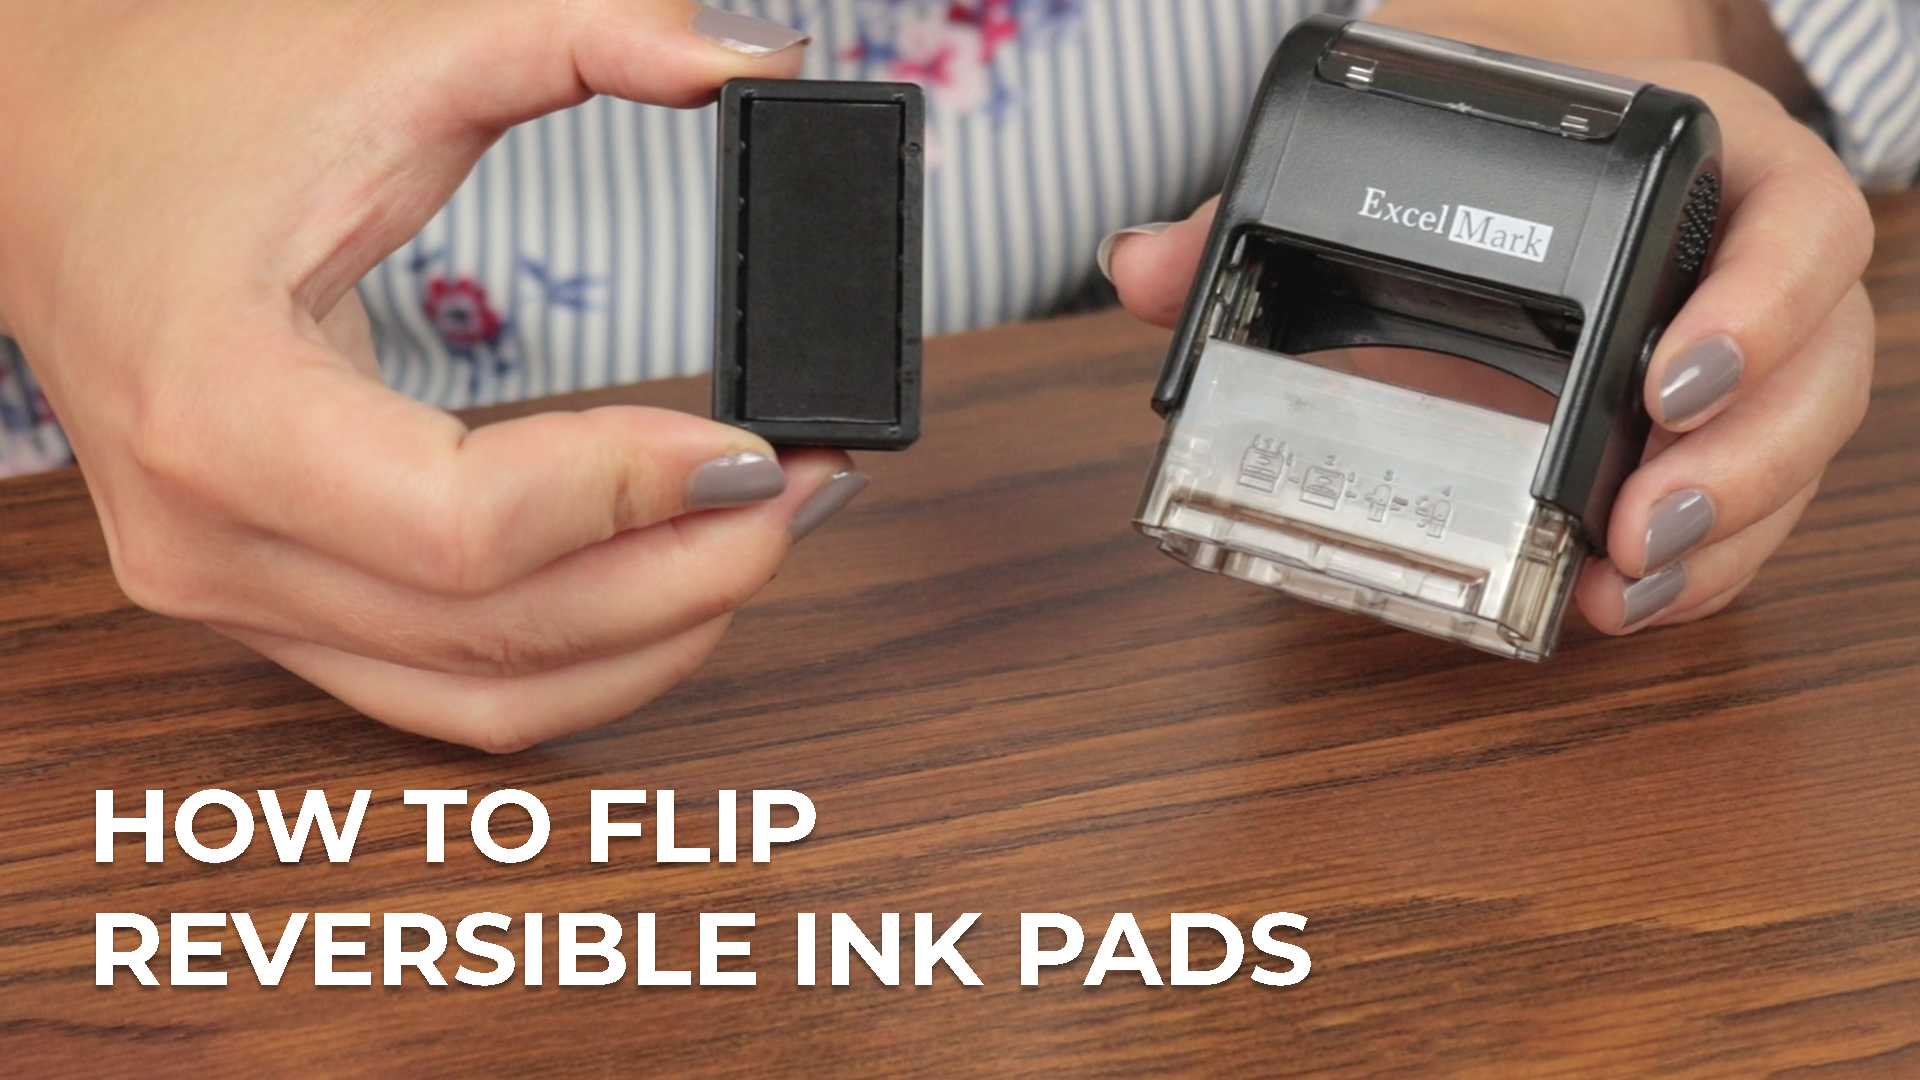 How to Refill Ink Stamps: Refilling Self Inking Stamps